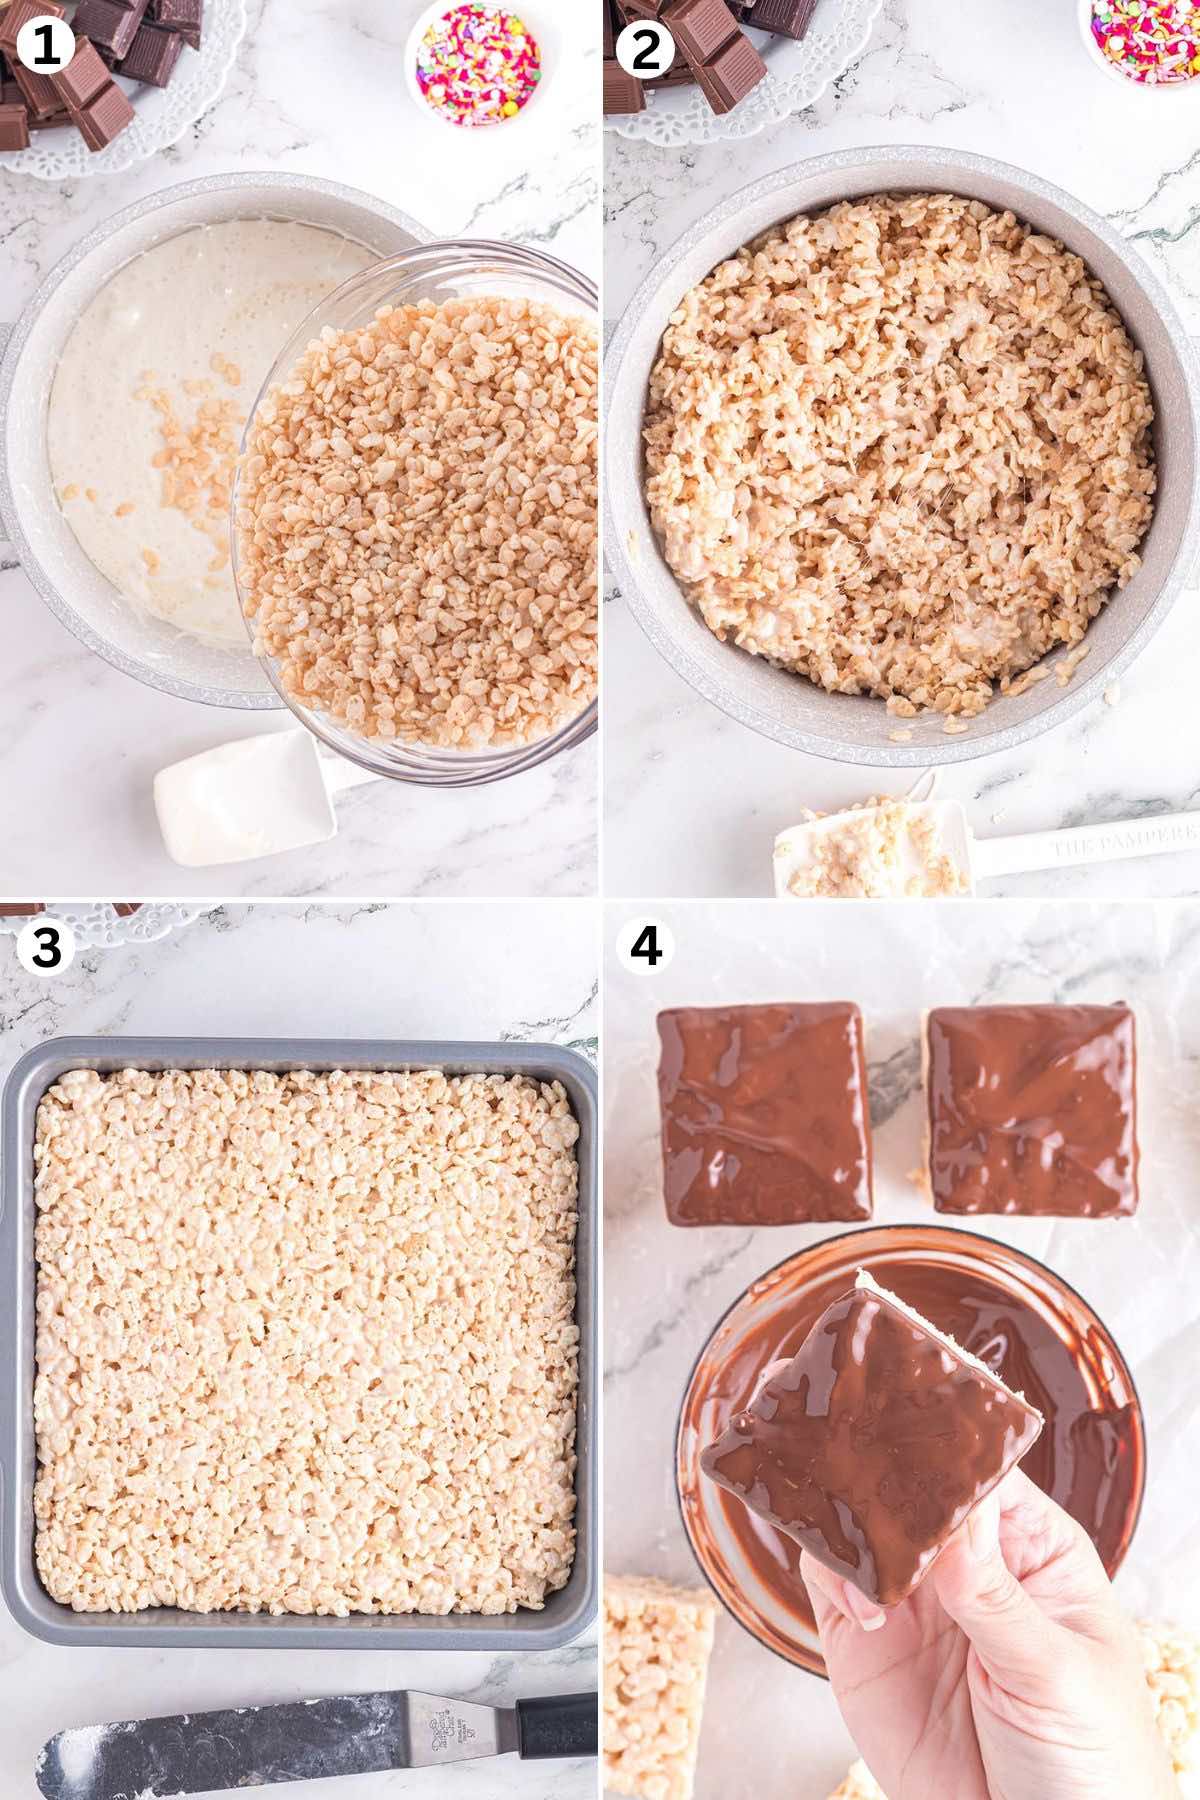 Add the Rice Krispies cereal to the marshmallow mixture.  Press the mixture into the pan. Cut and dip in the melted chocolate.